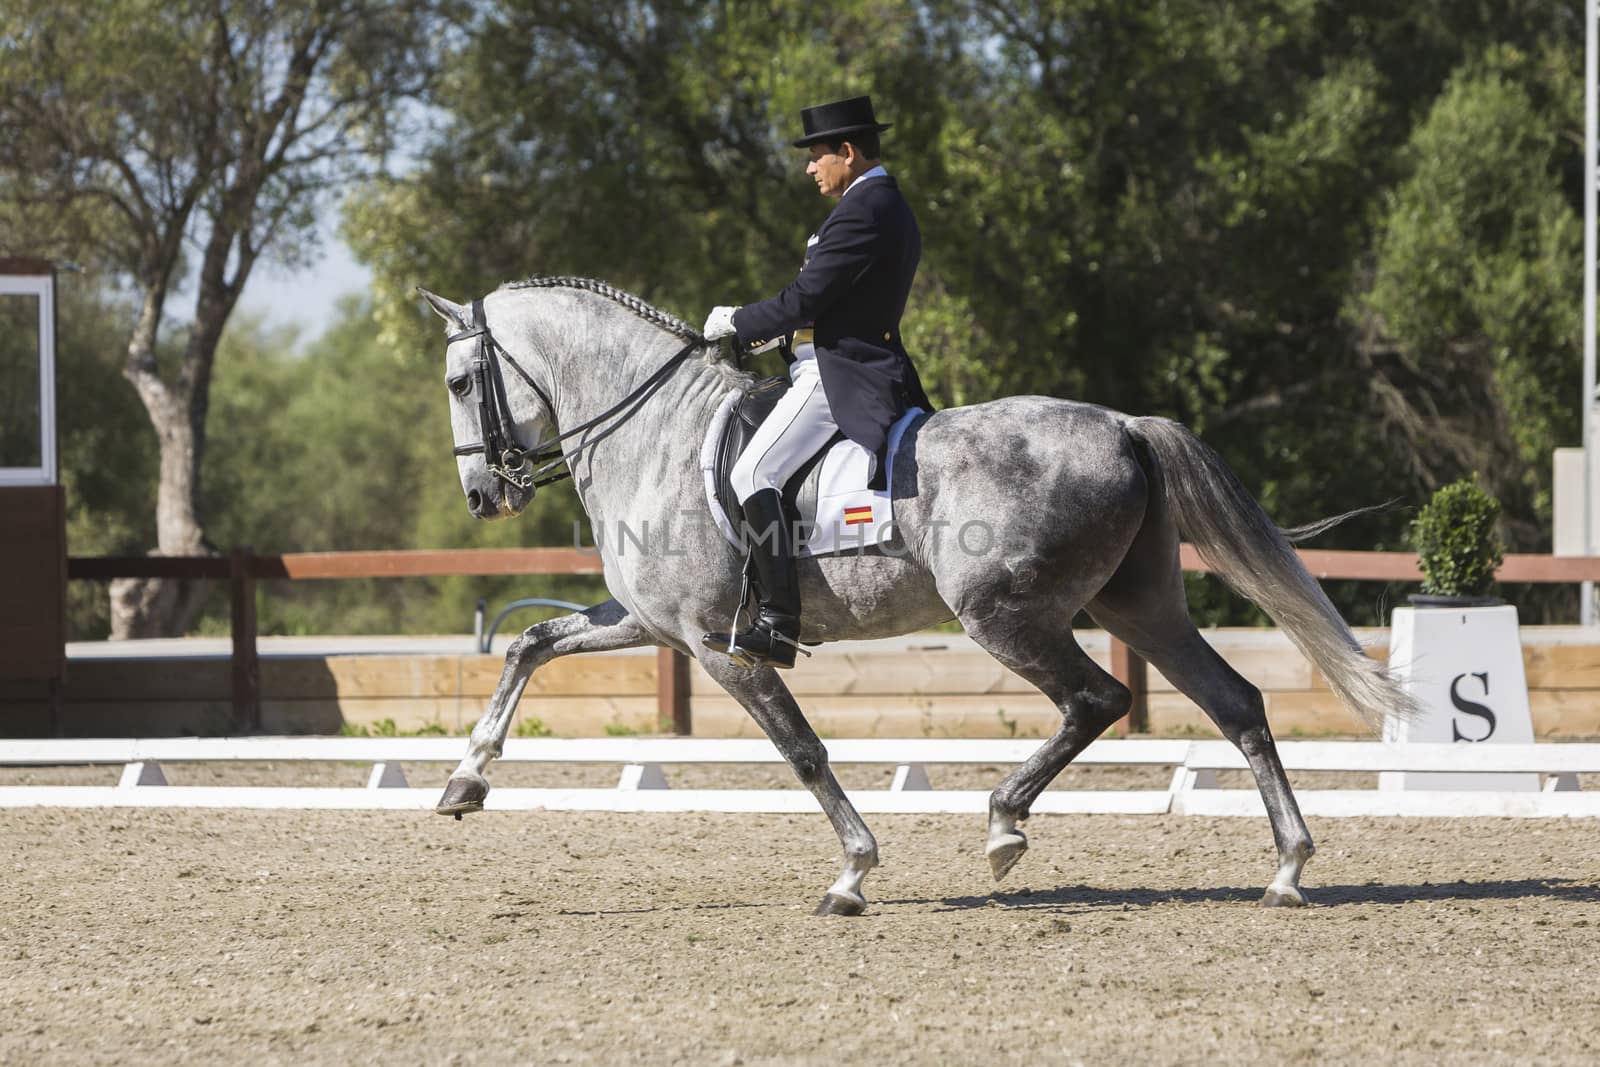 Montenmedio, Cadiz province, SPAIN - 12 july 2009: Spanish purebred horse competing in dressage competition classic, Montenmedio, Cadiz province, Andalusia, Spain